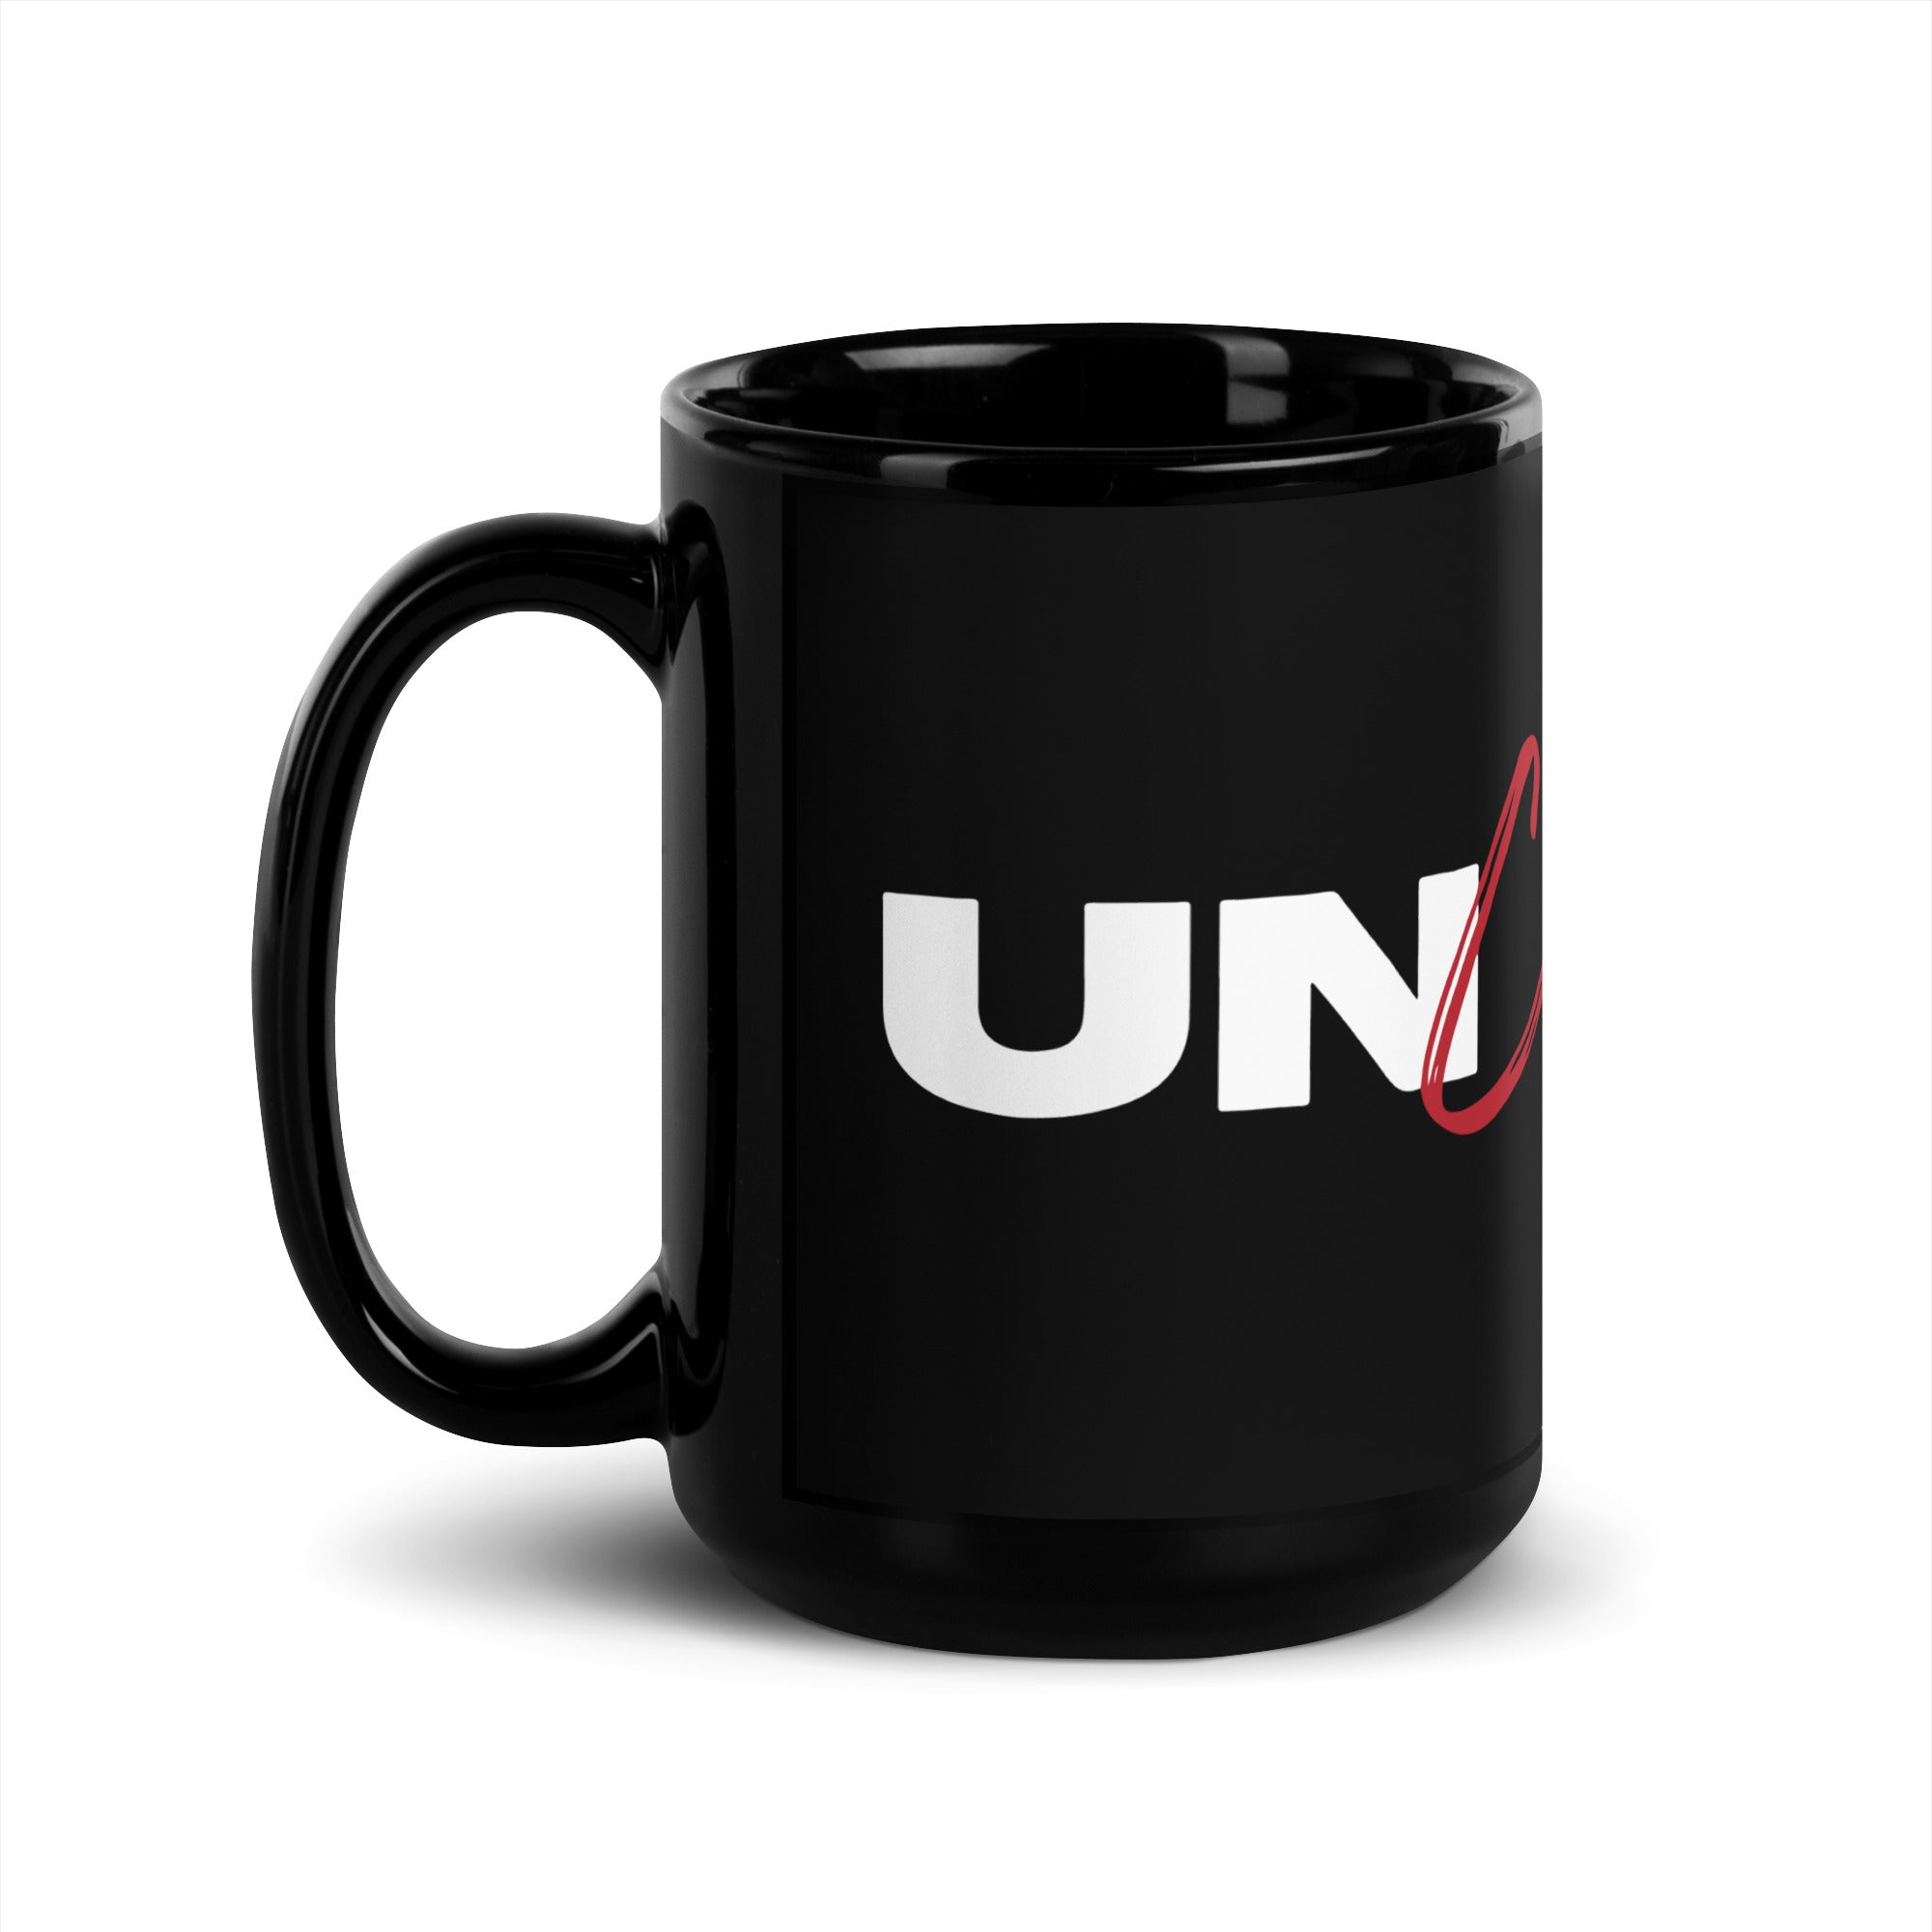 Unchained Potential Black Glossy Mug